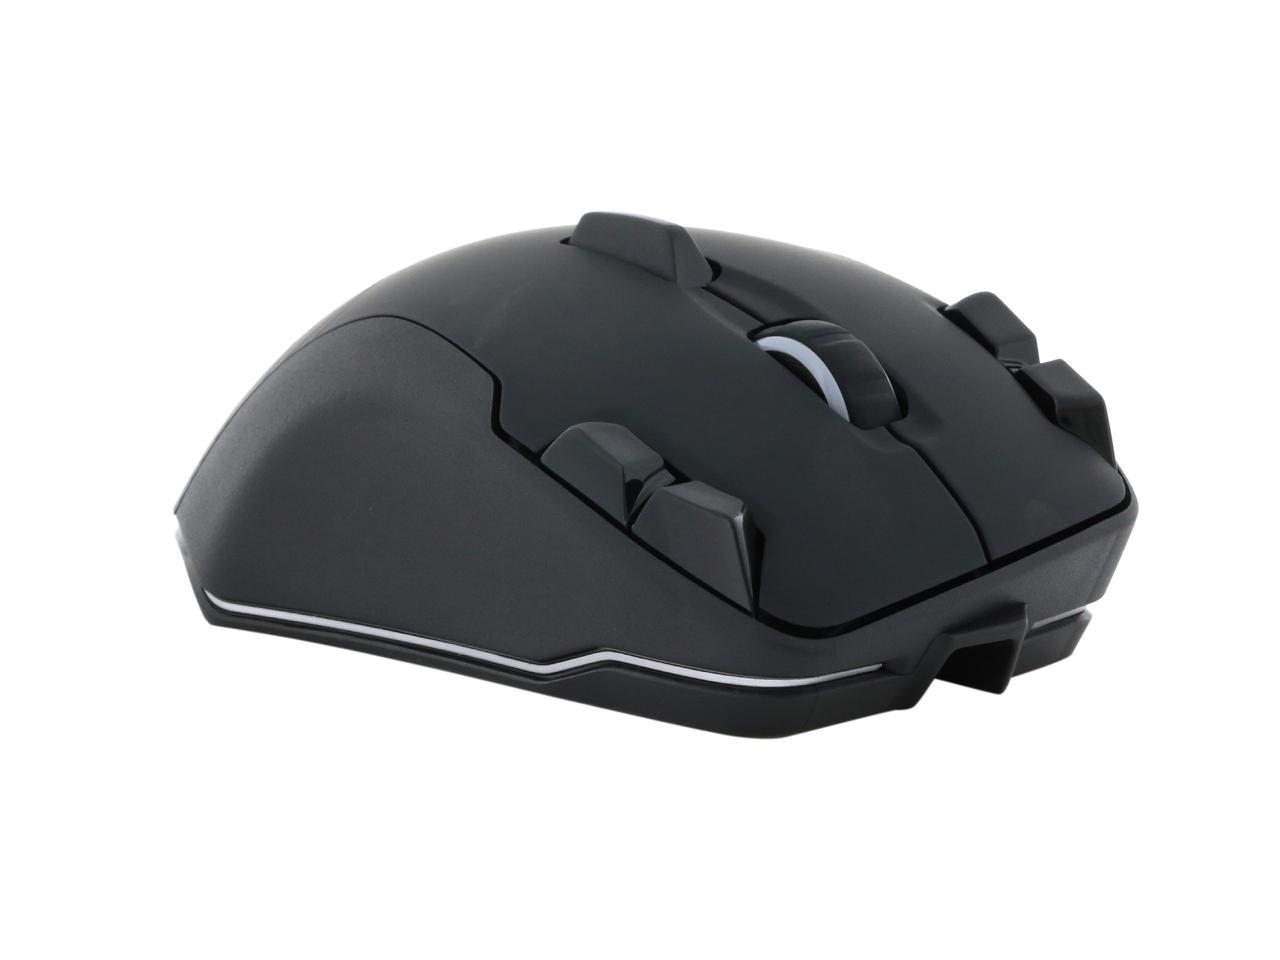 ROCCAT LEADR Wireless Multi-Button RGB Gaming Mouse - Newegg.ca